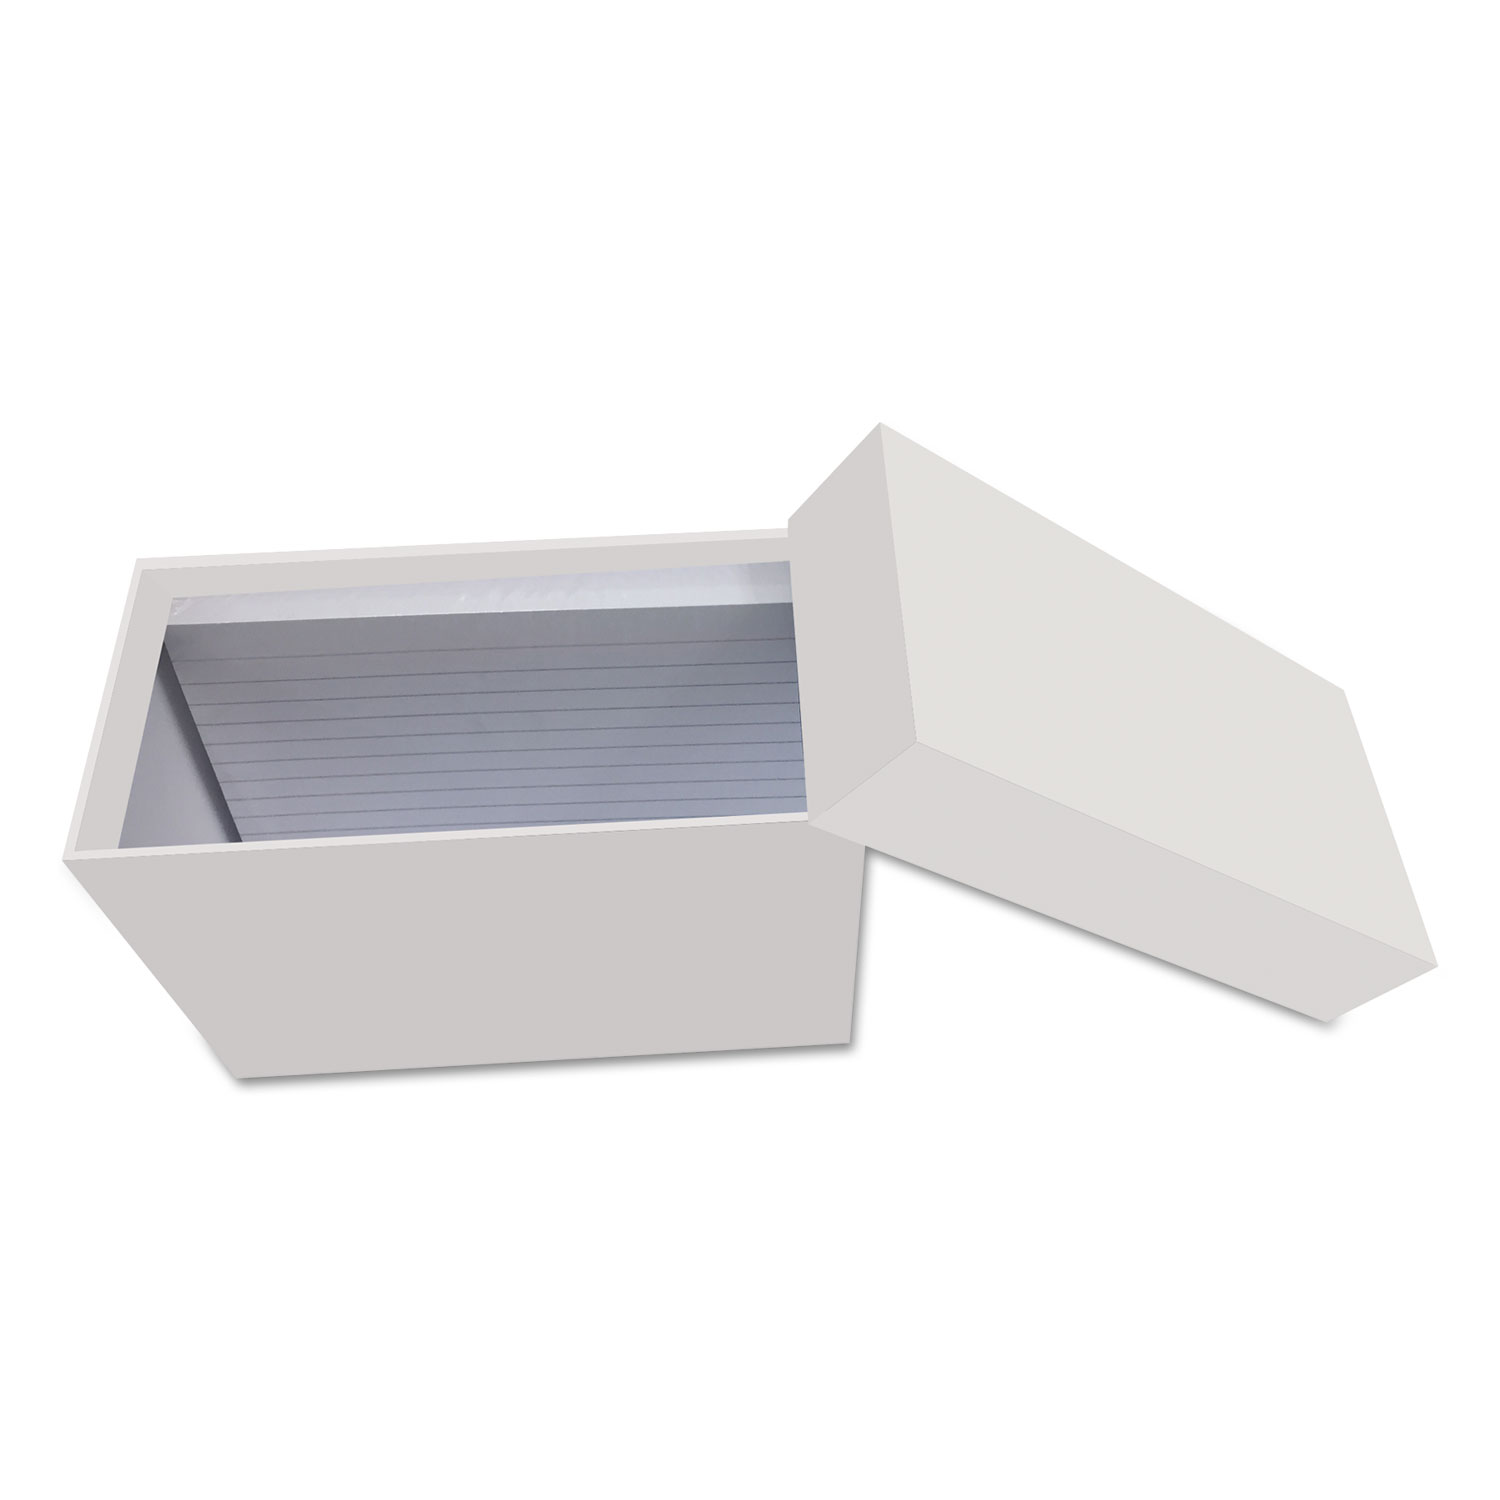 Index Card Box with 100 Ruled Index Cards, 3 x 5, Gray